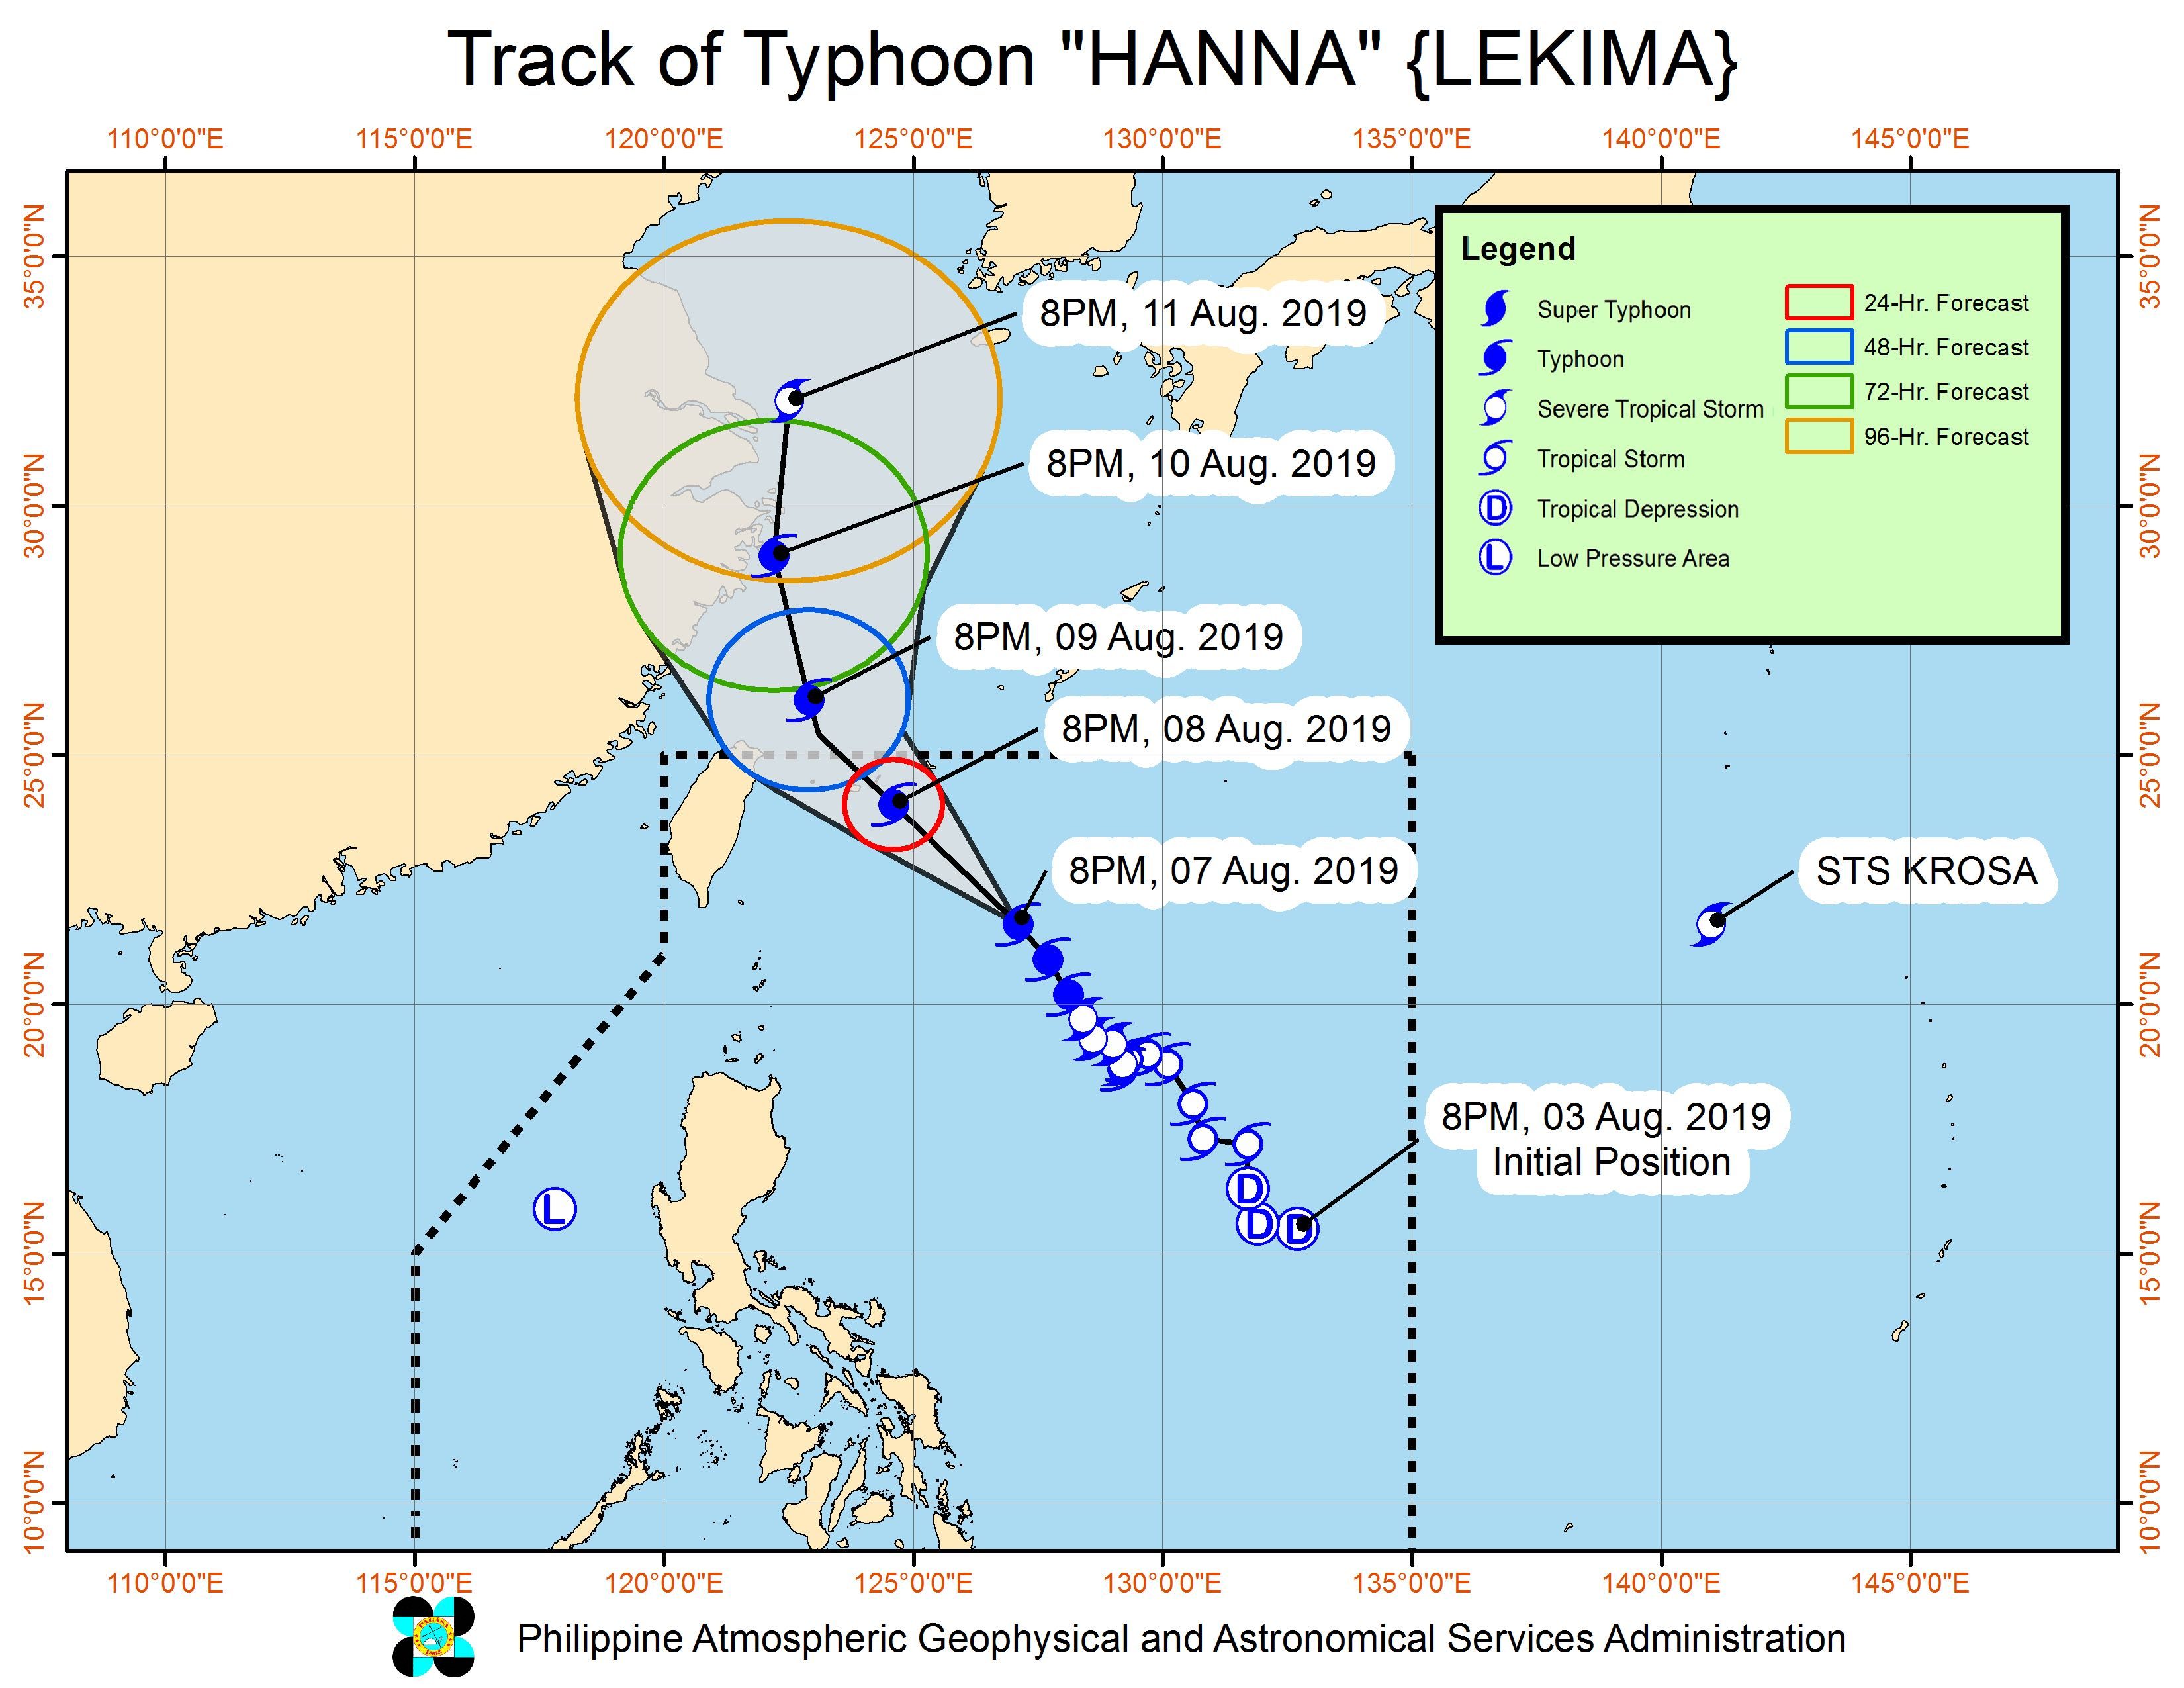 Forecast track of Typhoon Hanna (Lekima) as of August 7, 2019, 11 pm. Image from PAGASA 